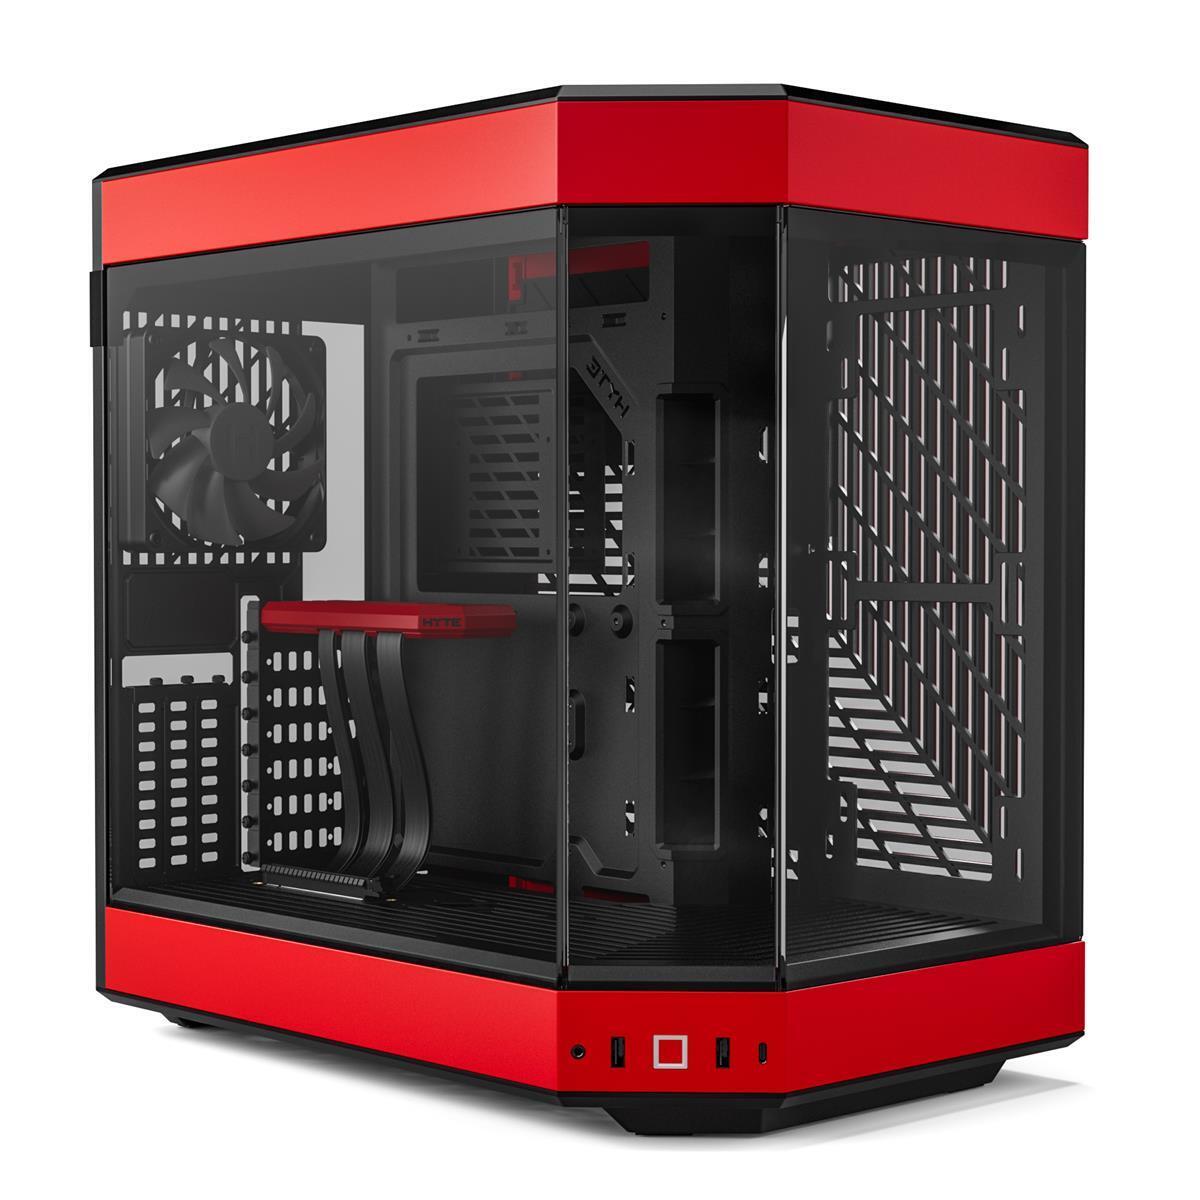 HYTE Y60 Modern Aesthetic Tempered Glass Mid-Tower ATX PC Case, Red #CSHYTEY60BR